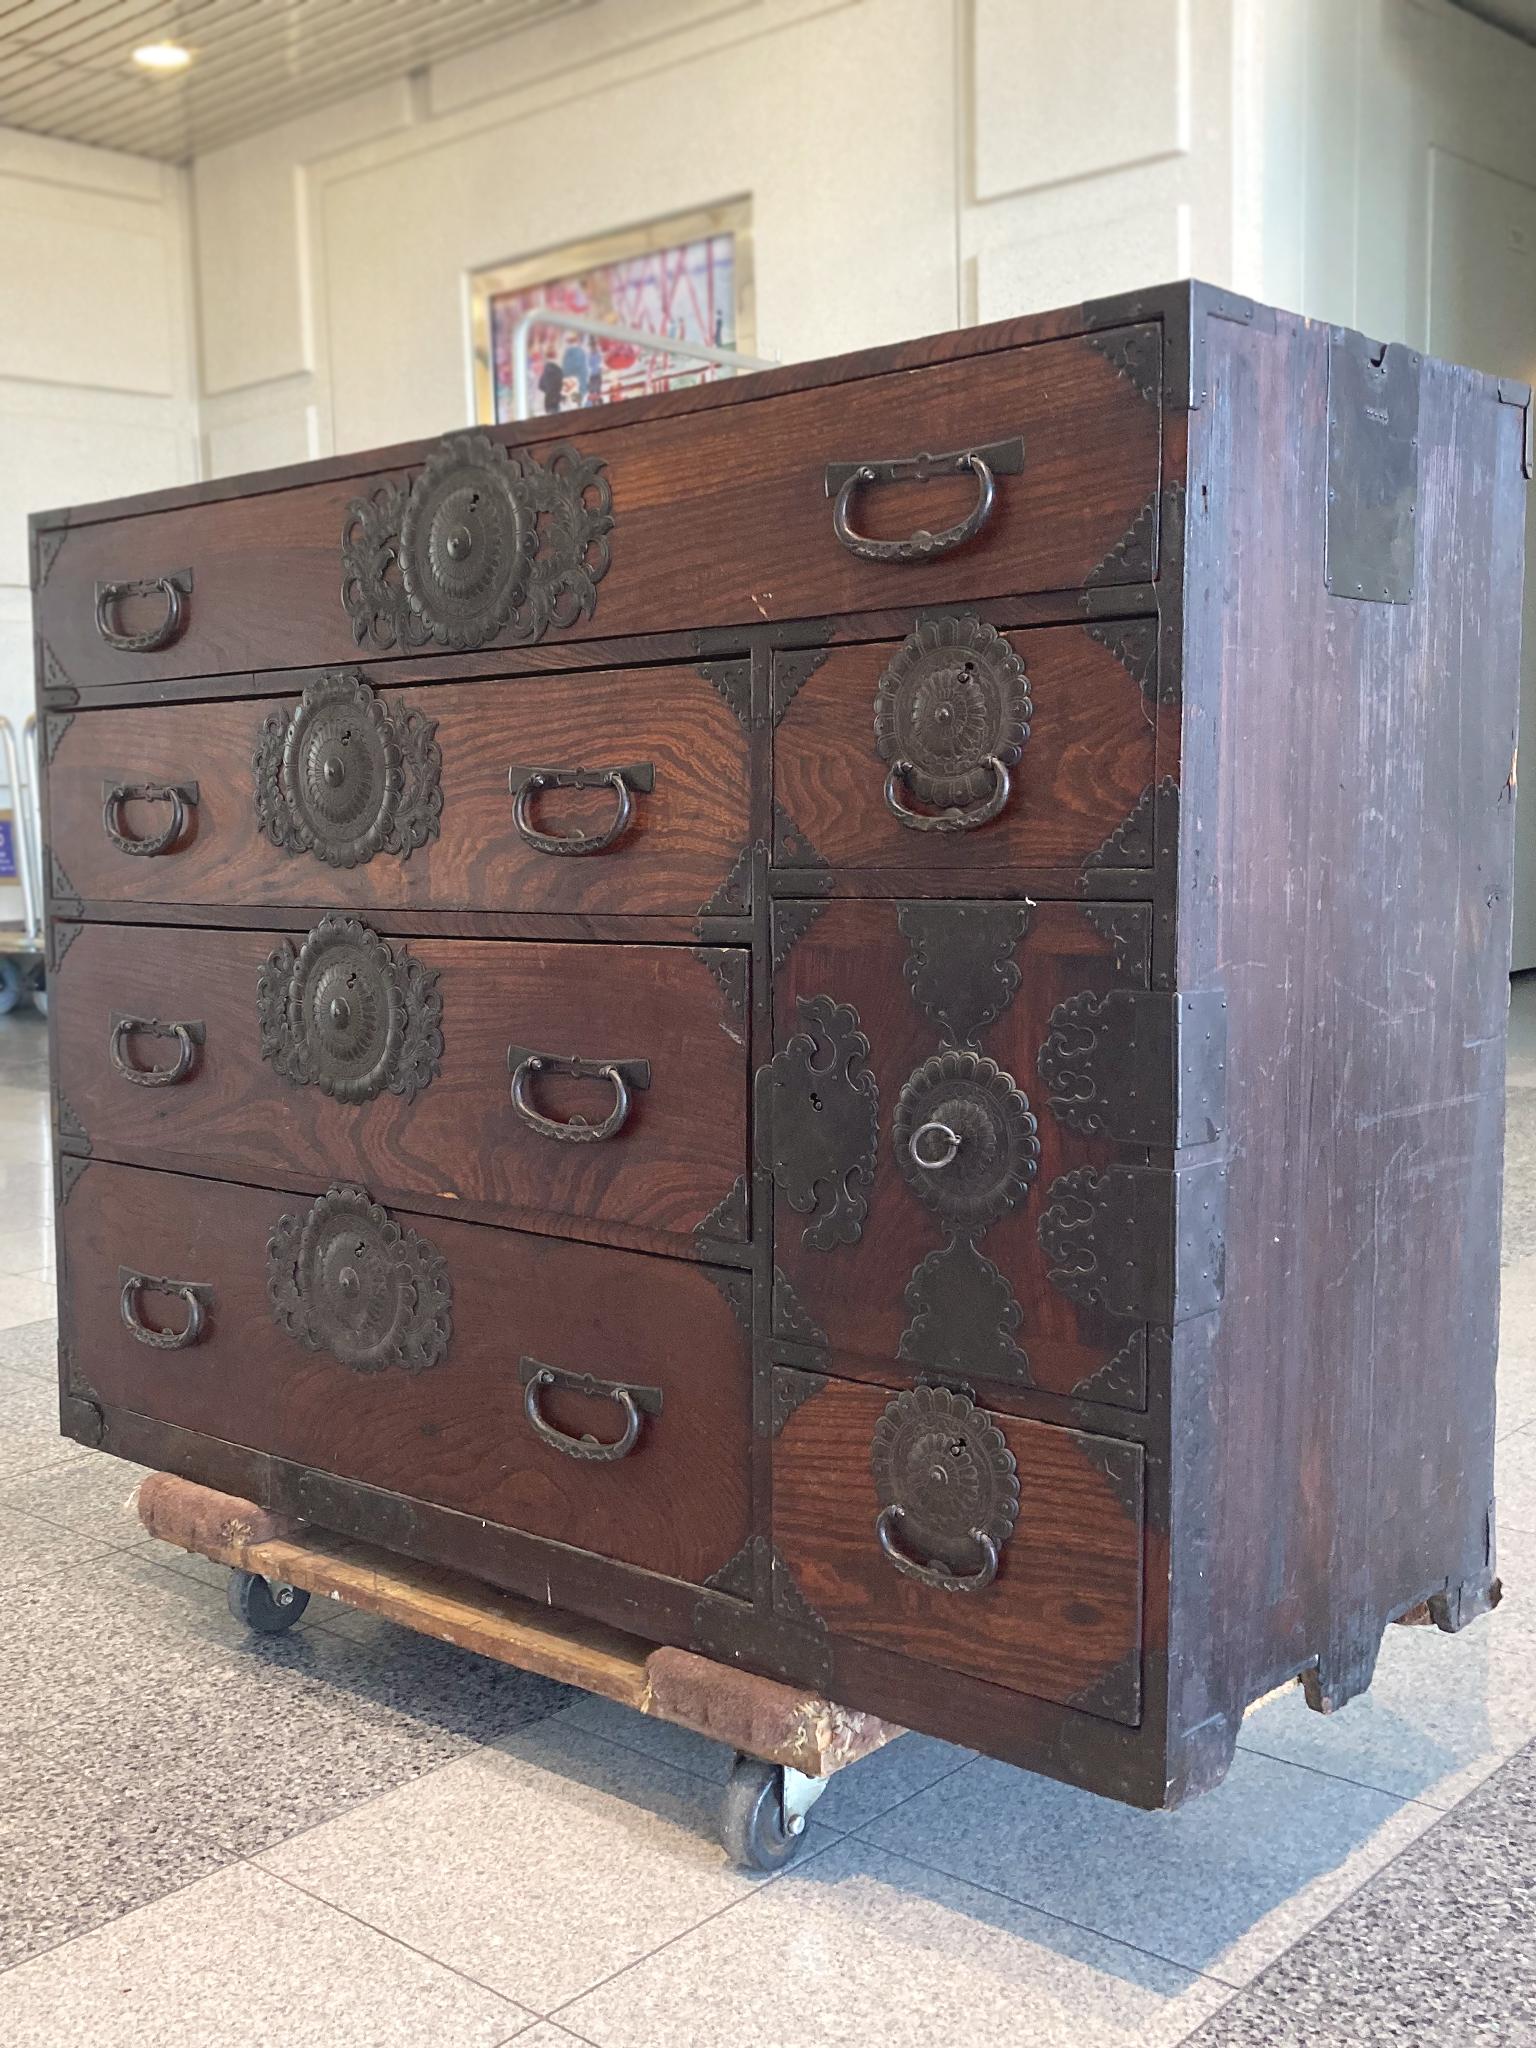 19th century tansu with 6 drawers and a cabinet that opens to 3 small compartments. The intricate hardware is cast iron. The pinewood a has rich red-brown finish. We love the overall organic wear to the wood which really gives the chest its warmth